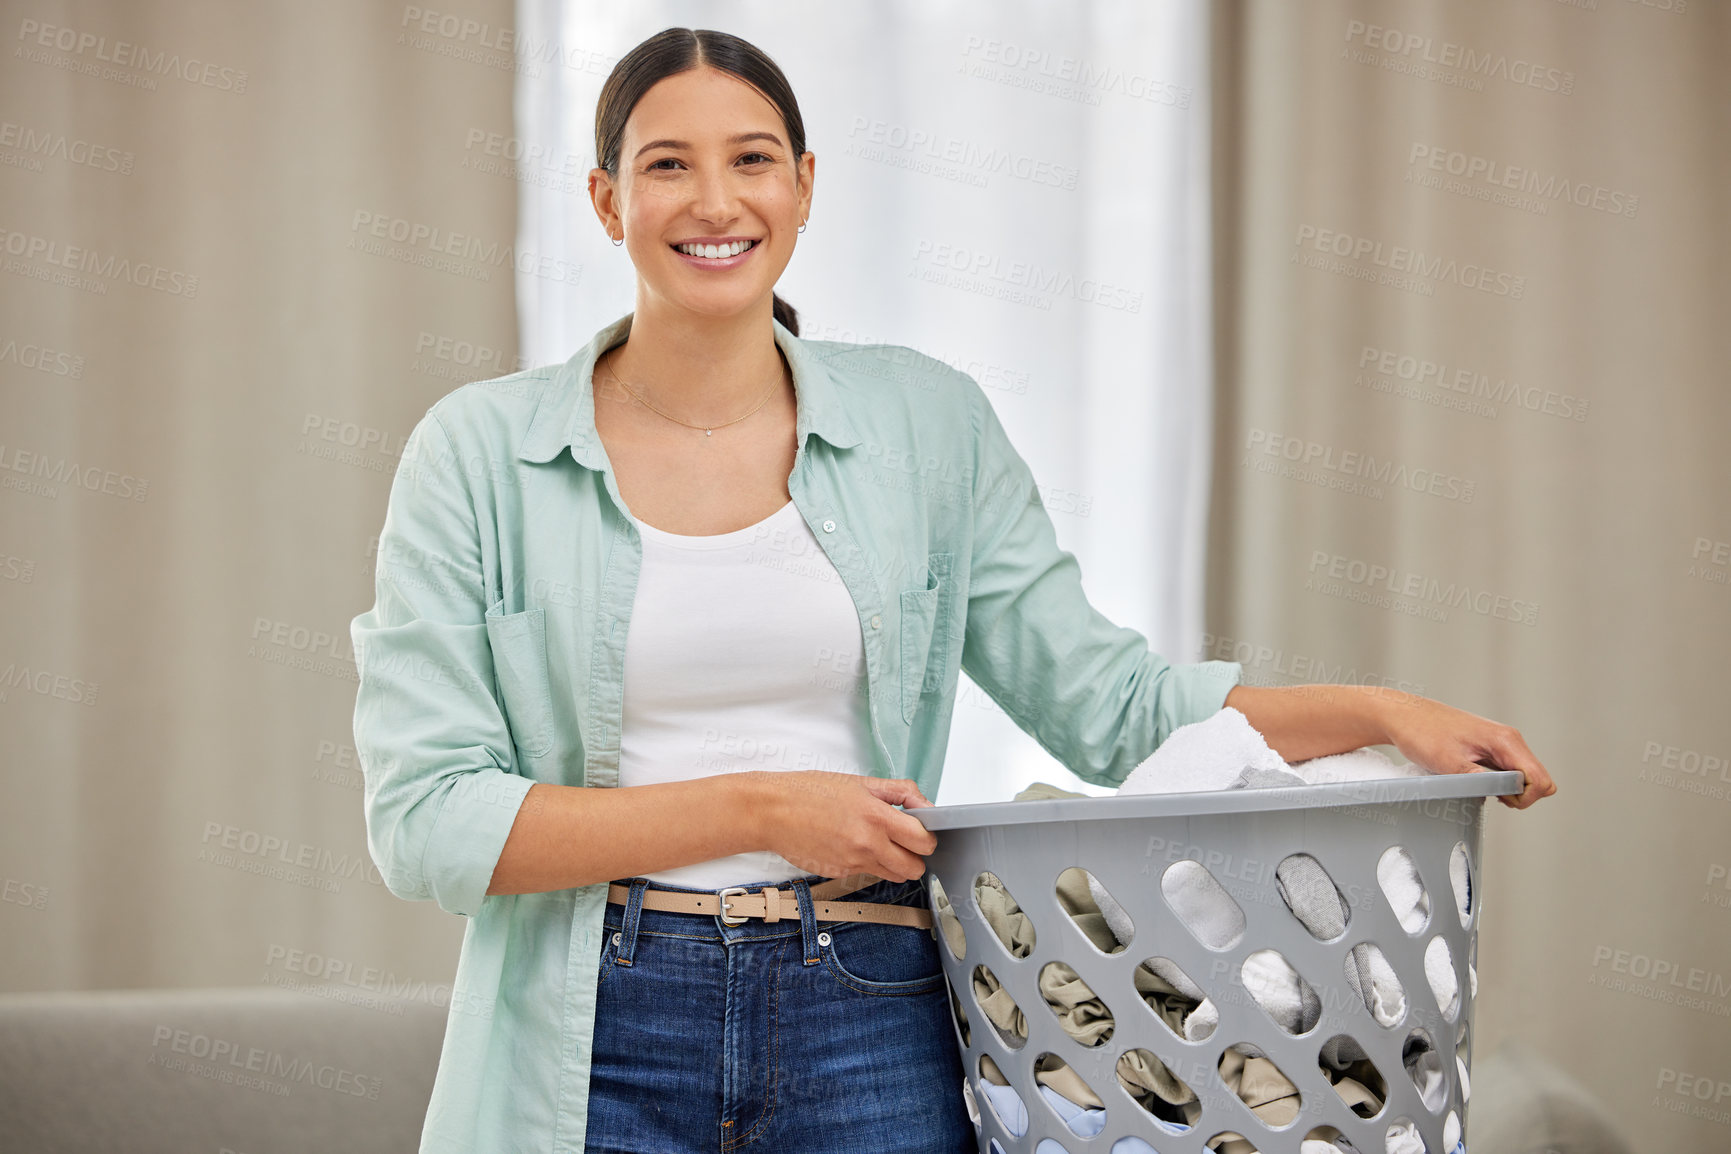 Buy stock photo Shot of a young woman doing laundry at home